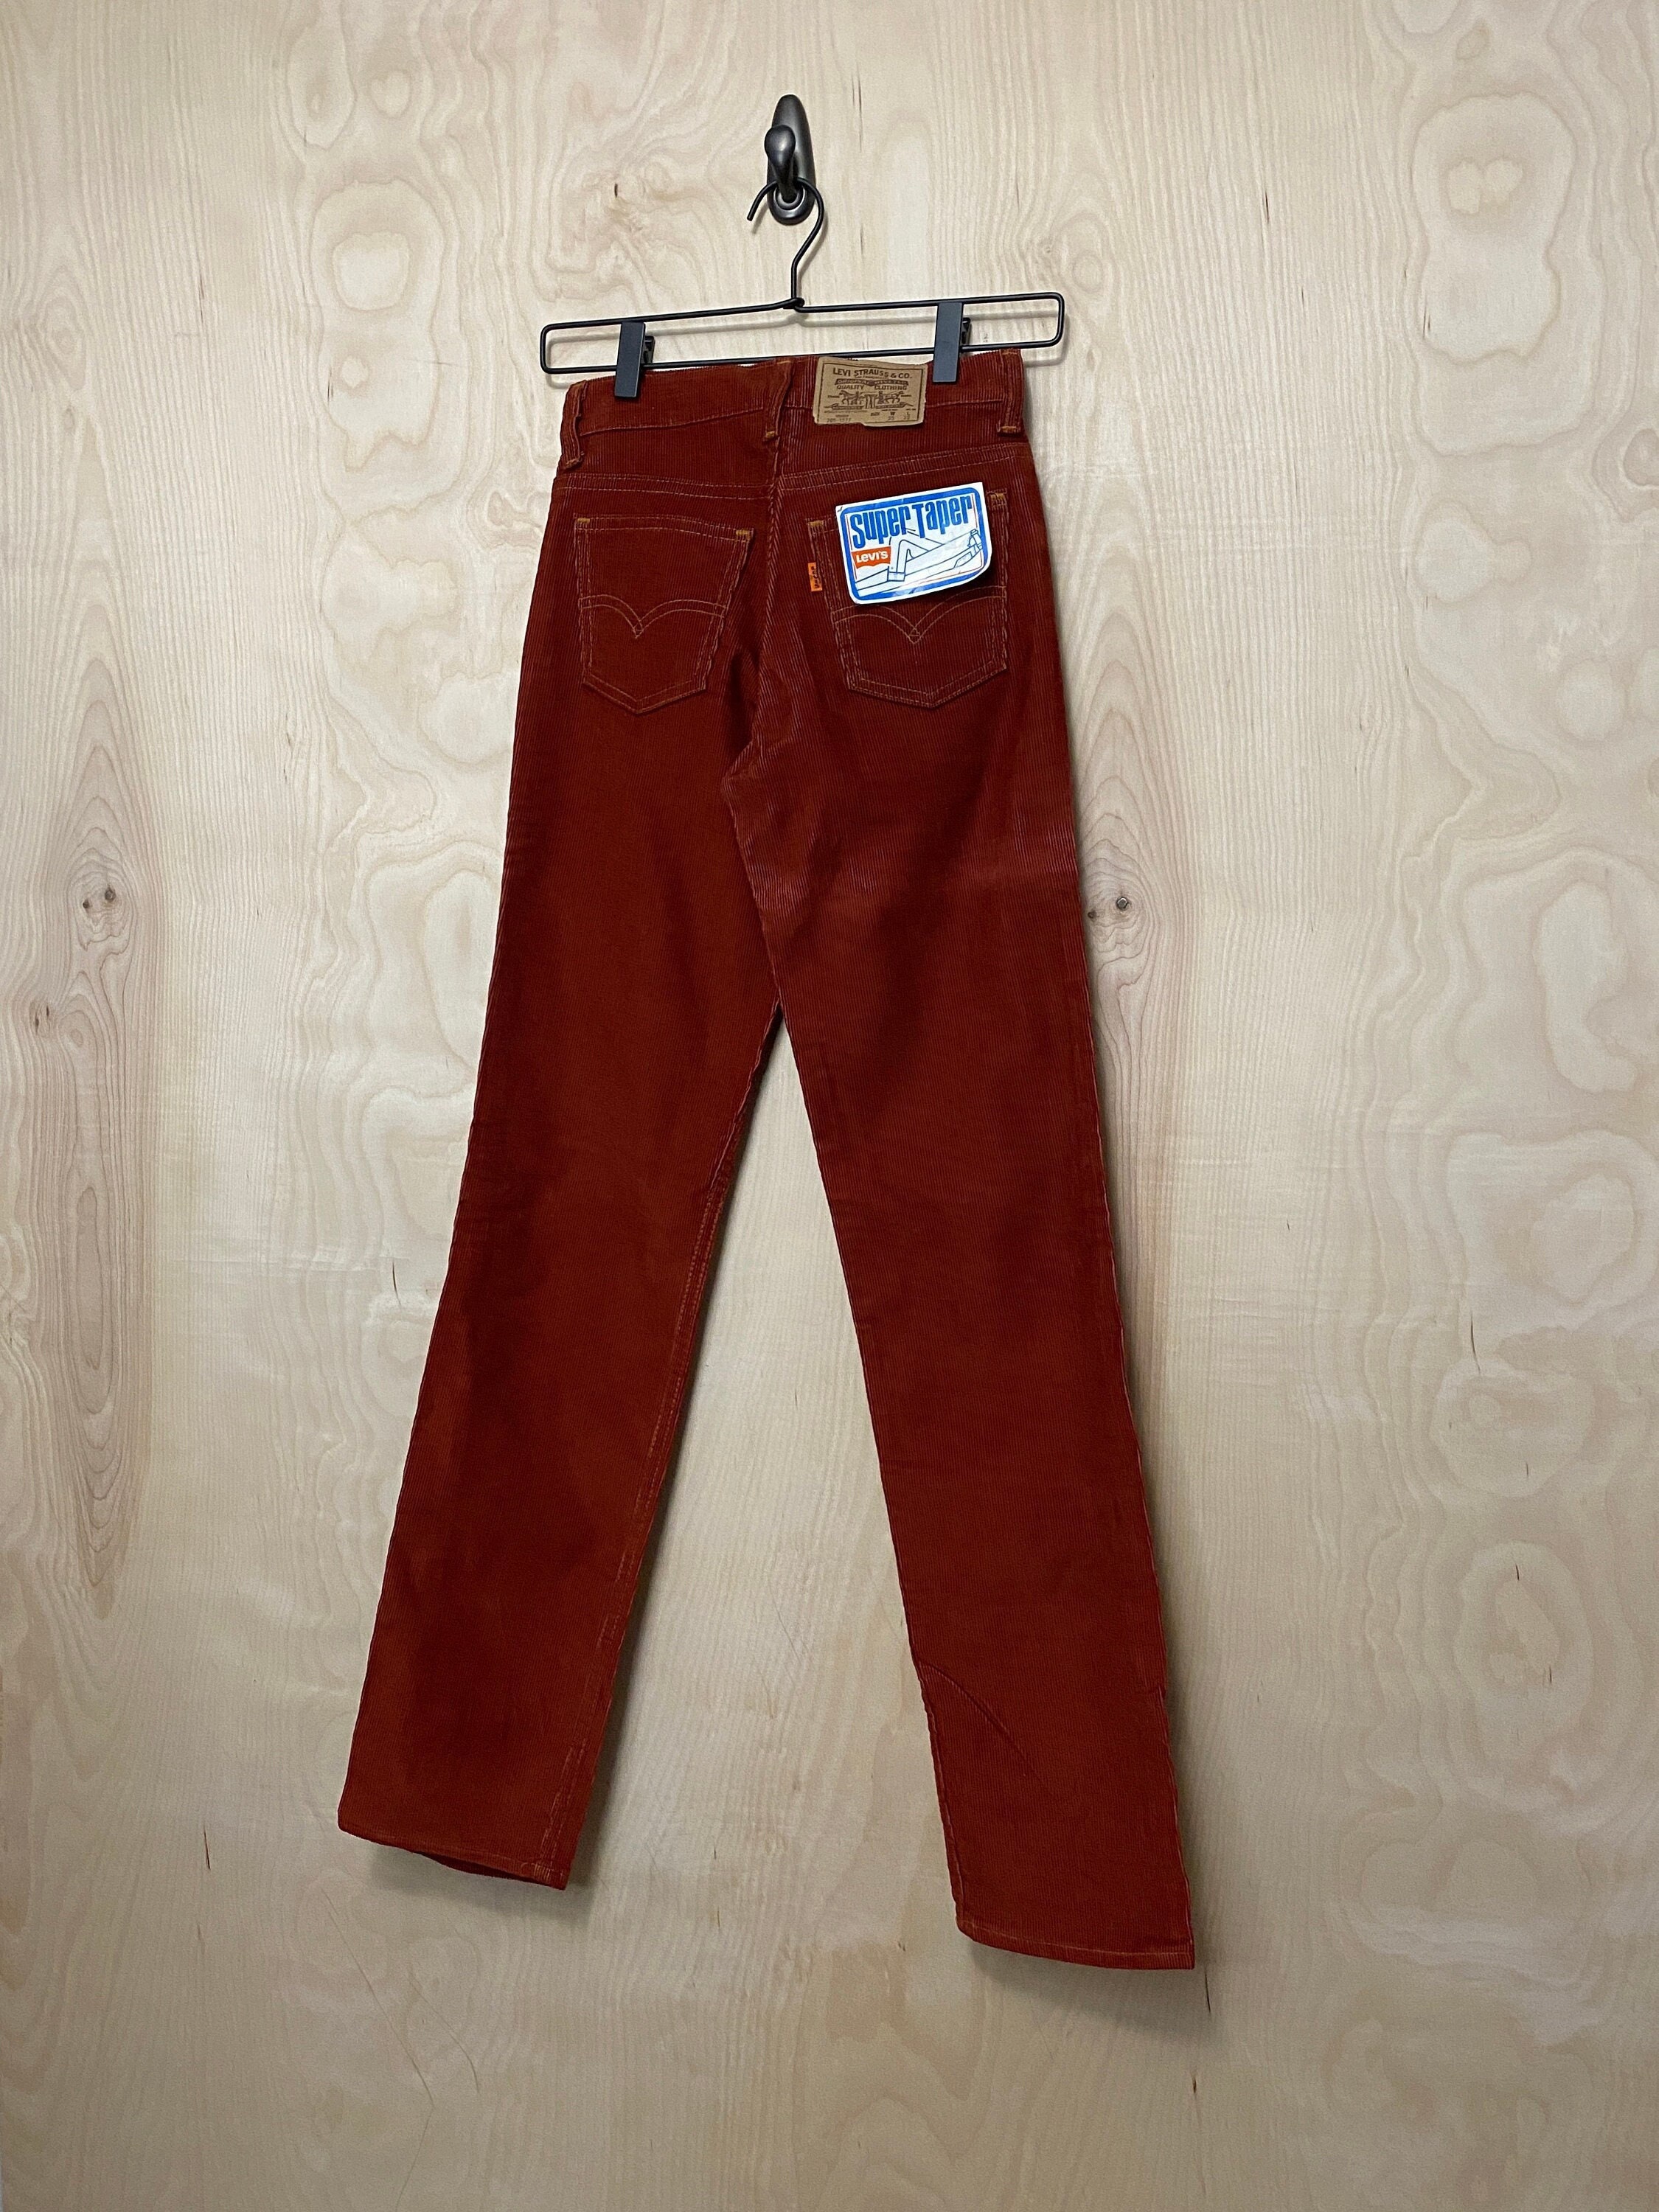 Vintage 70s NWT Levis 705 1577 Student Fit Super Taper Brown Corduroy Pant  Size 25 X 32 -  Canada